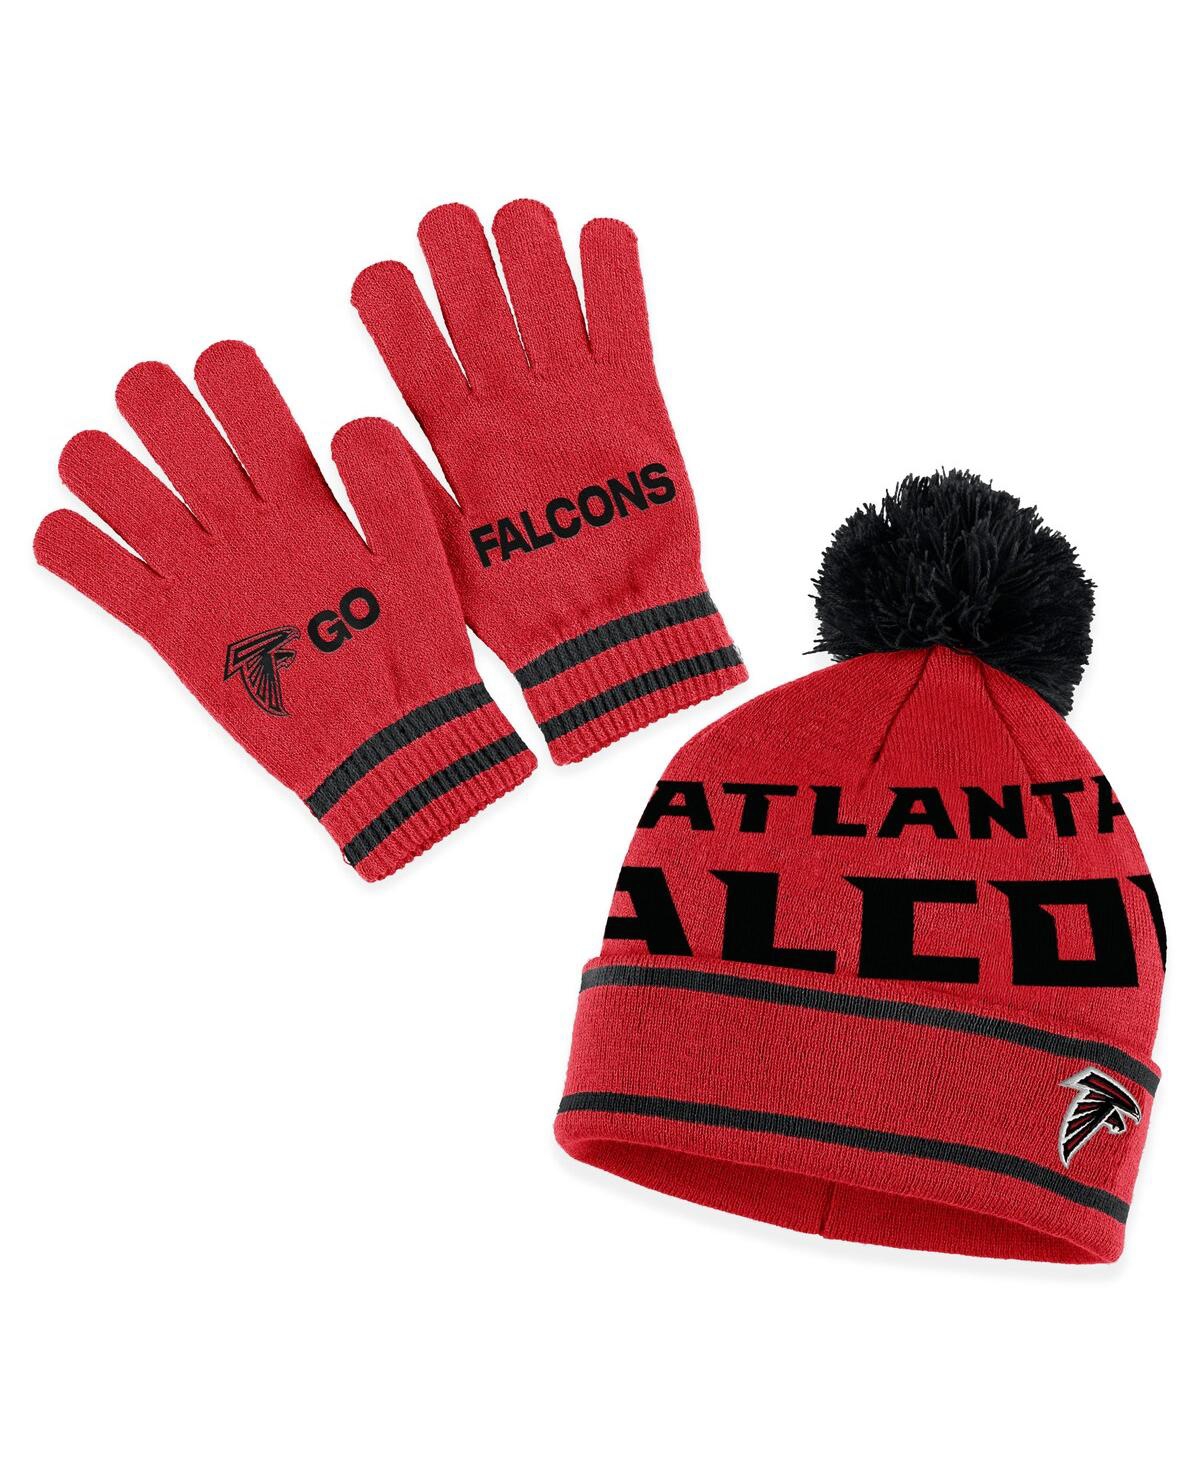 Women's Wear by Erin Andrews Red Atlanta Falcons Double Jacquard Cuffed Knit Hat with Pom and Gloves Set - Red